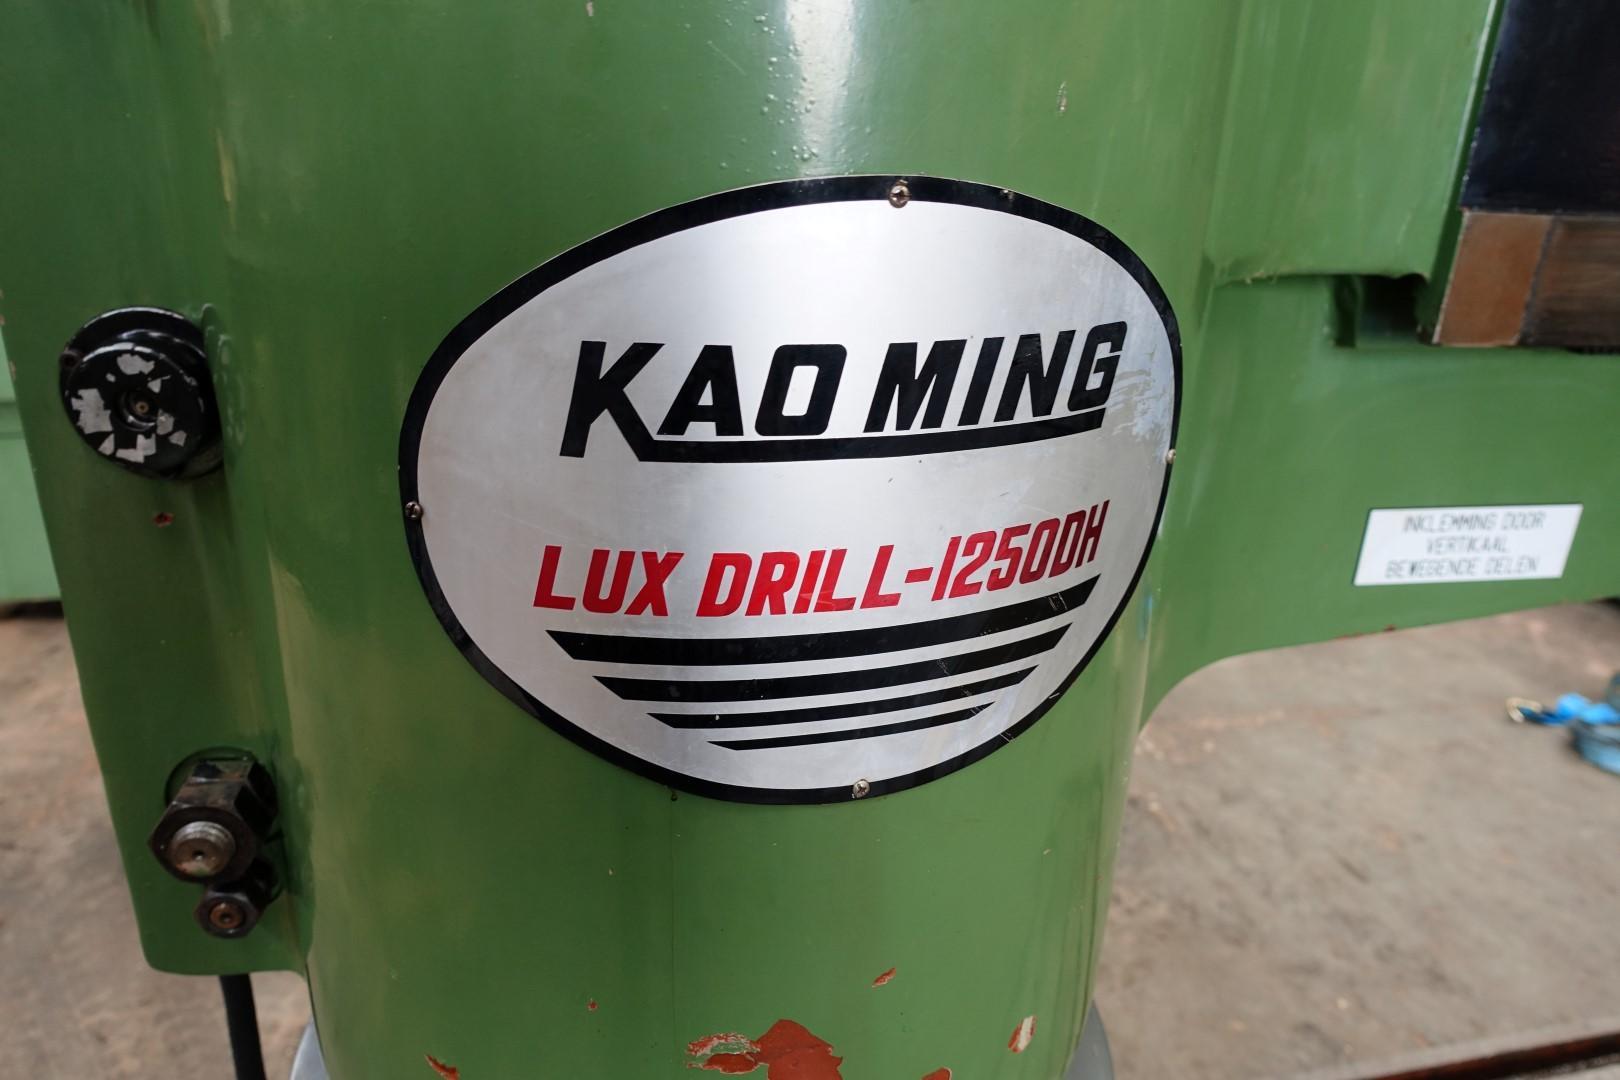 Drilling (General)/Kao Ming - Lux Drill-1250 DH